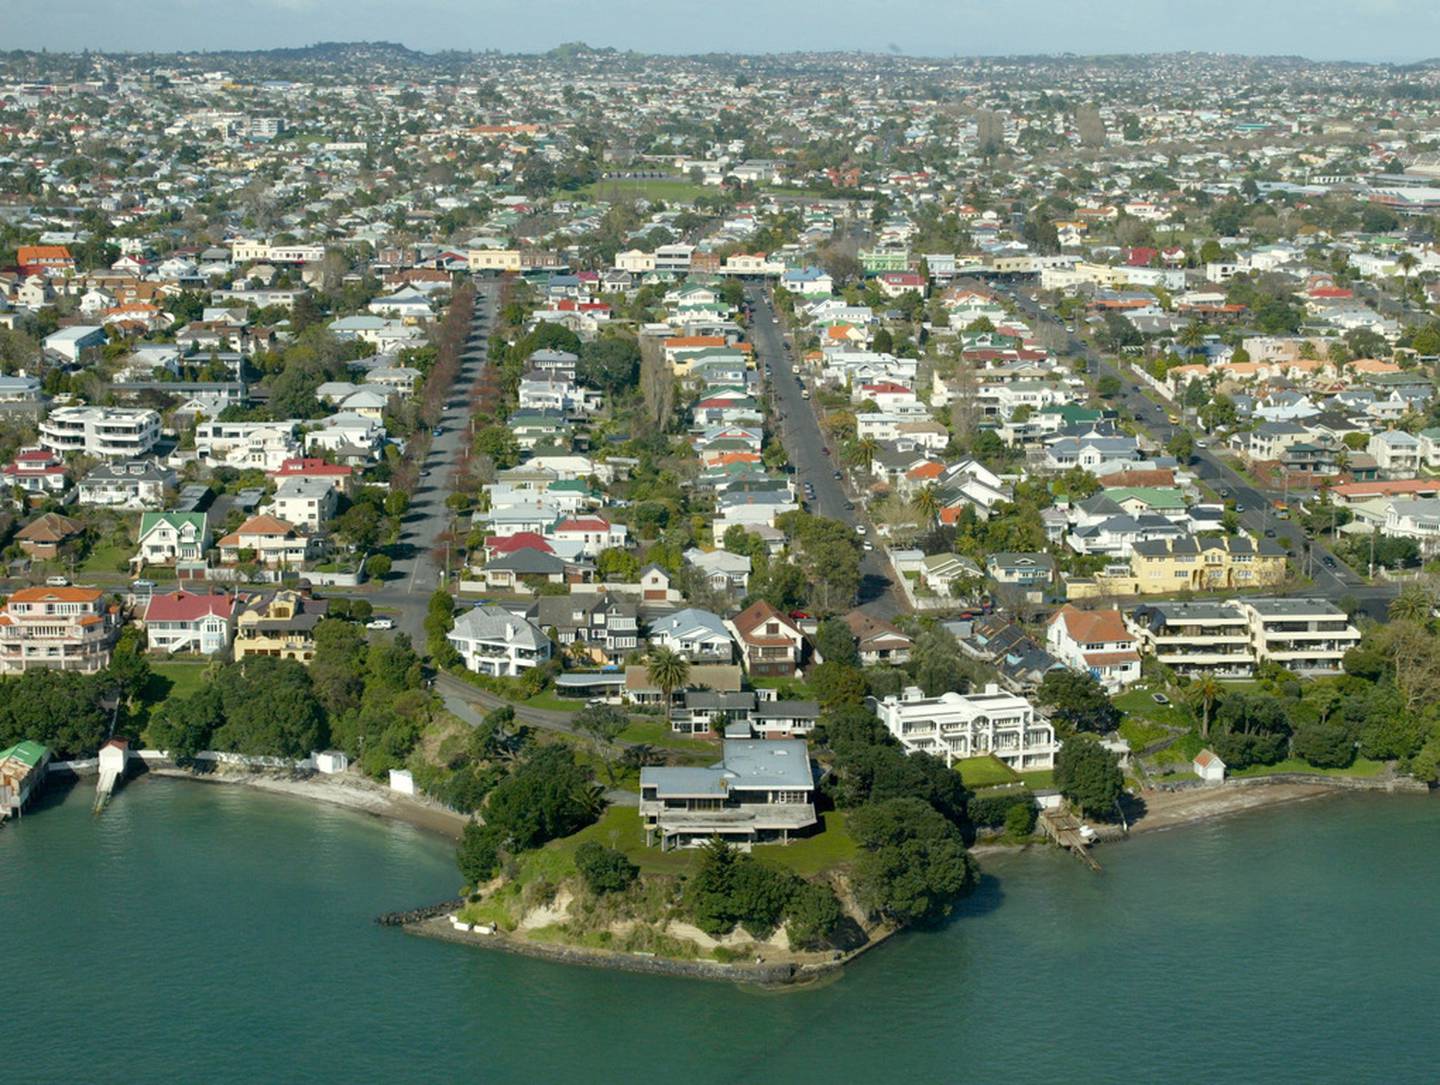 Average house prices in Auckland's Herne Bay are now over $4m, bringing in big commissions for real estate agents. Photo / File